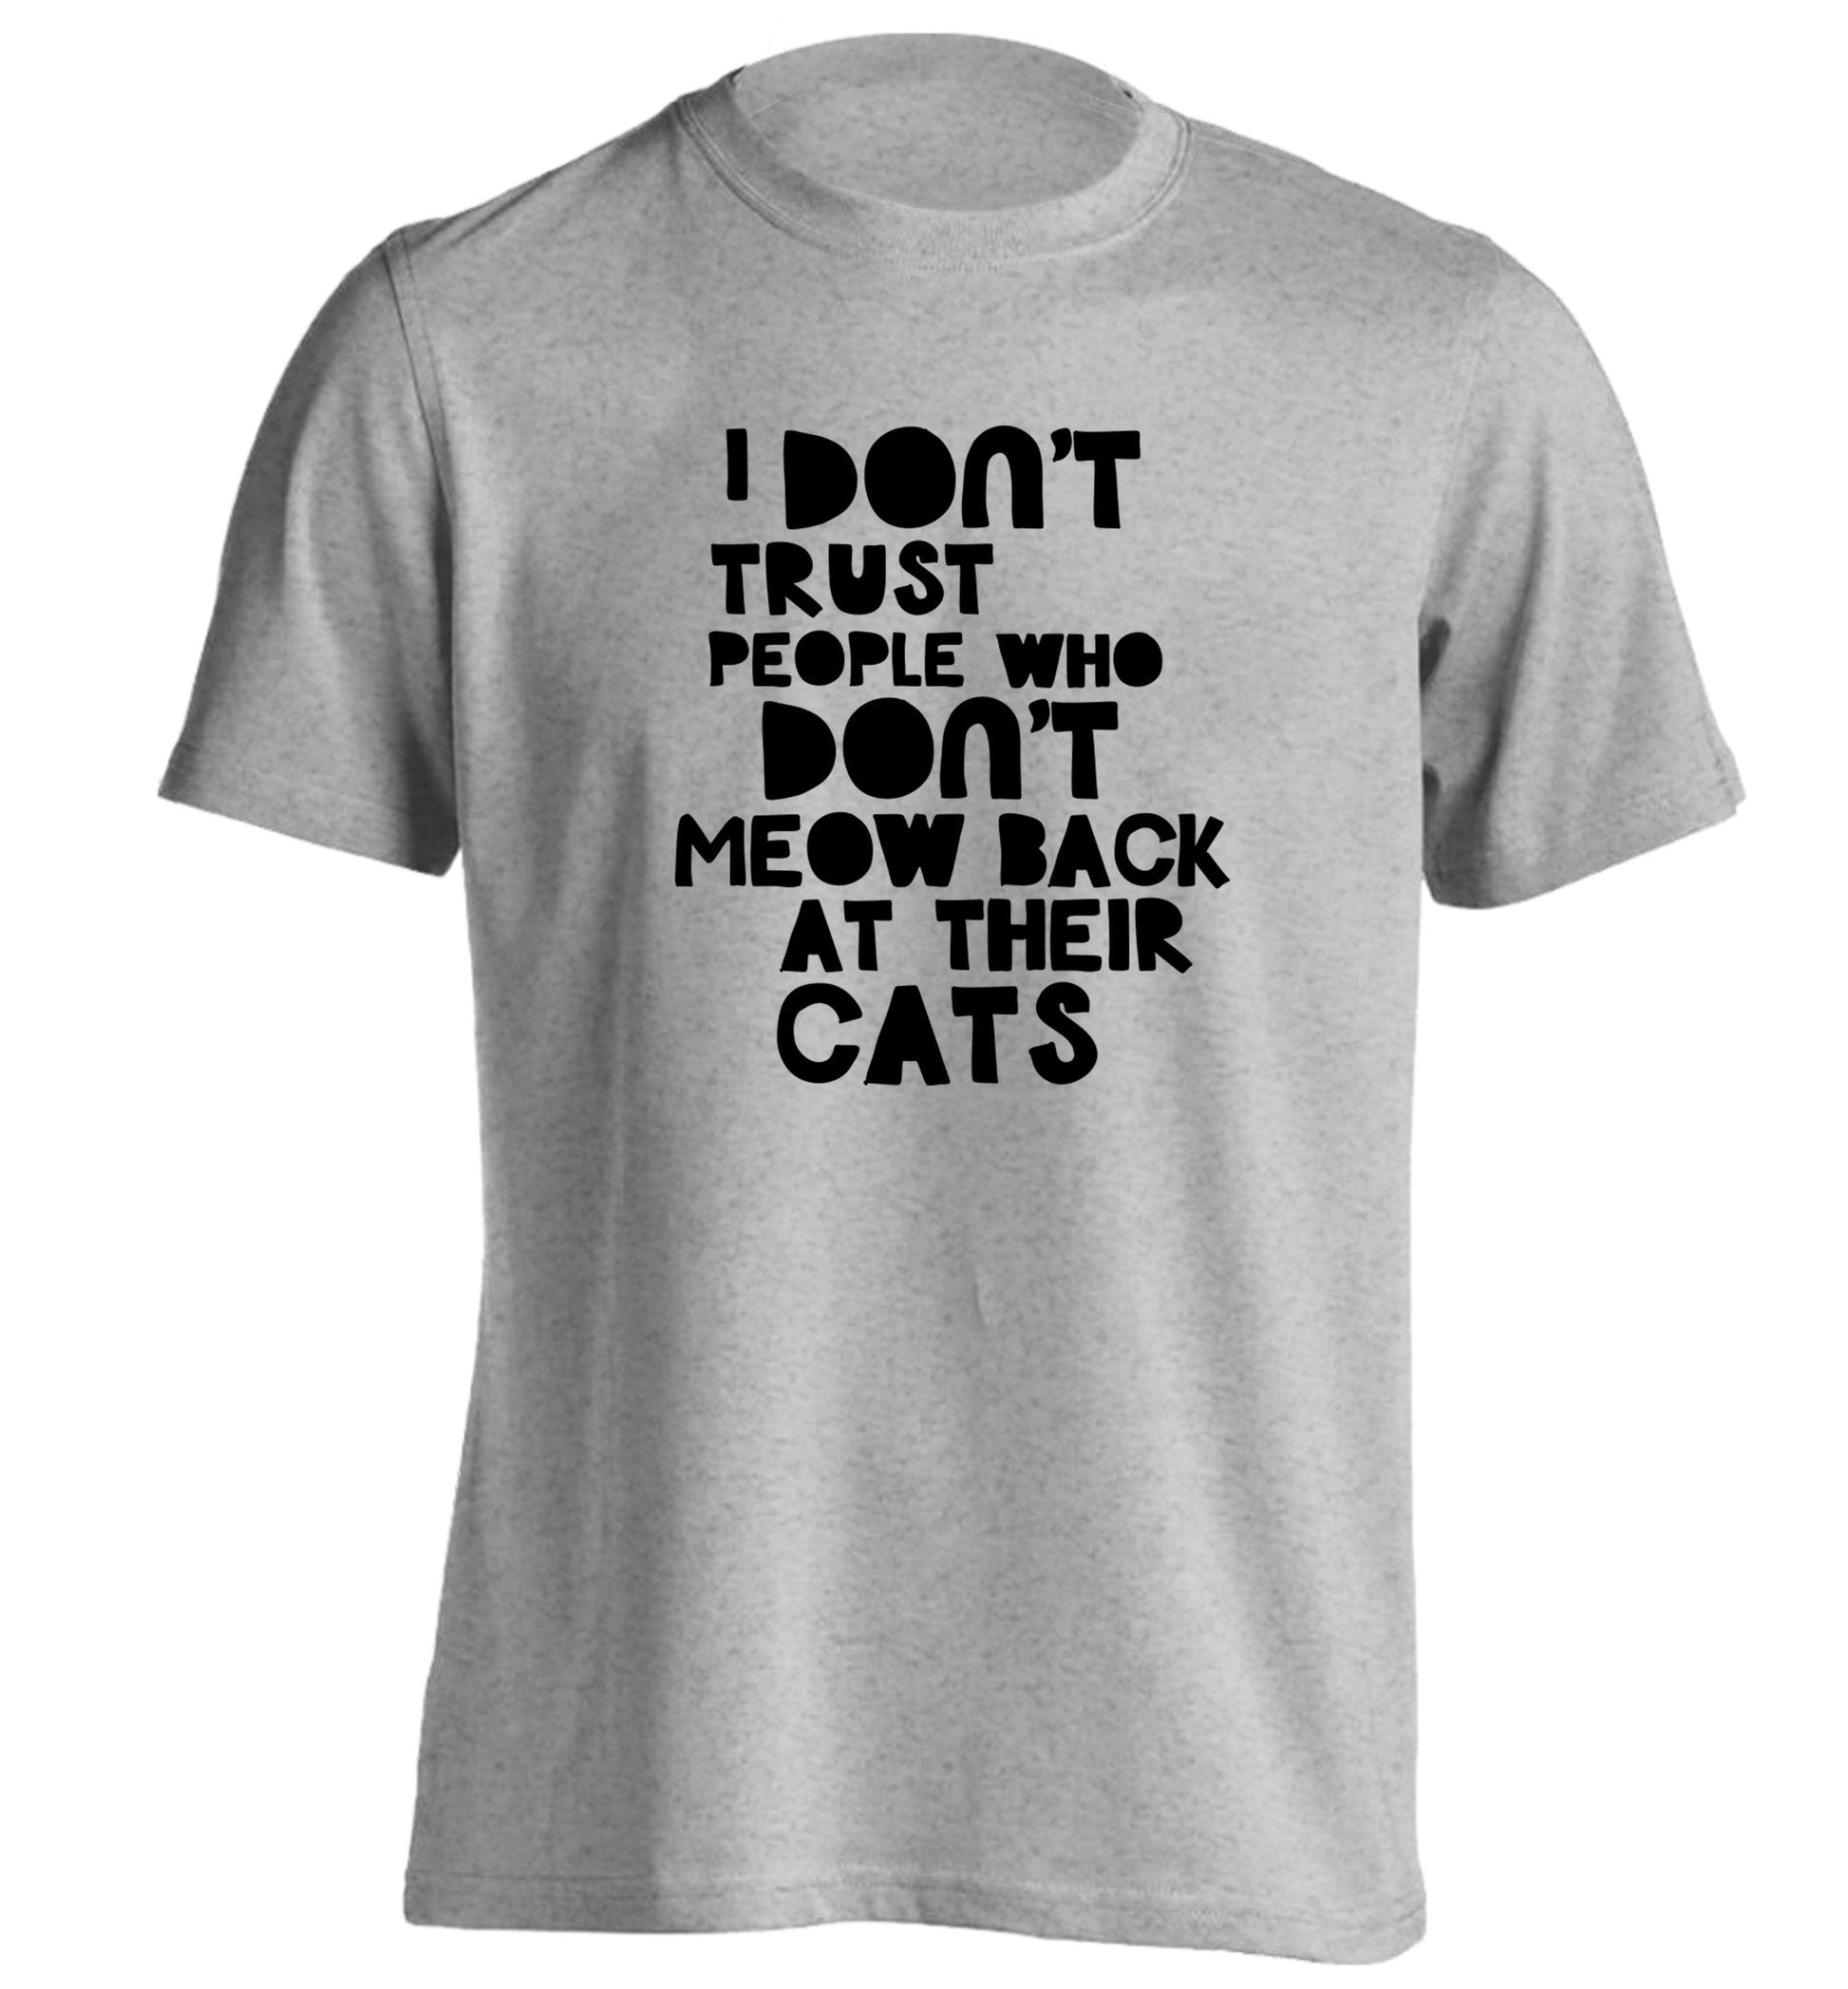 I don't trust people who don't meow back at their cats adults unisex grey Tshirt 2XL